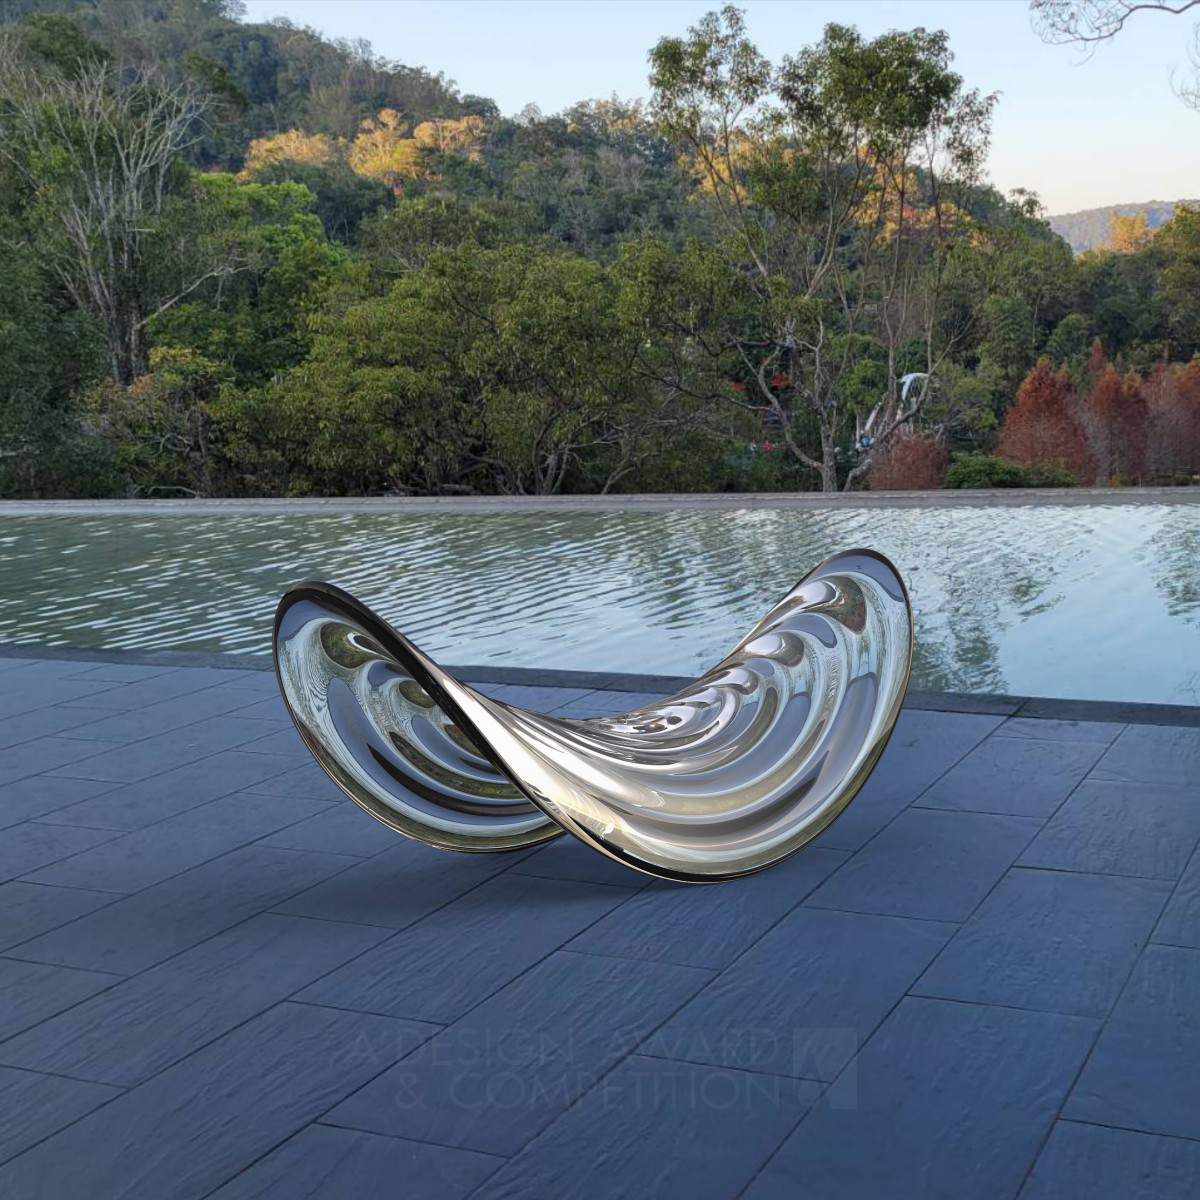 KUO-HSIANG KUO wins Silver at the prestigious A' Furniture Design Award with Water Ripples Chair.